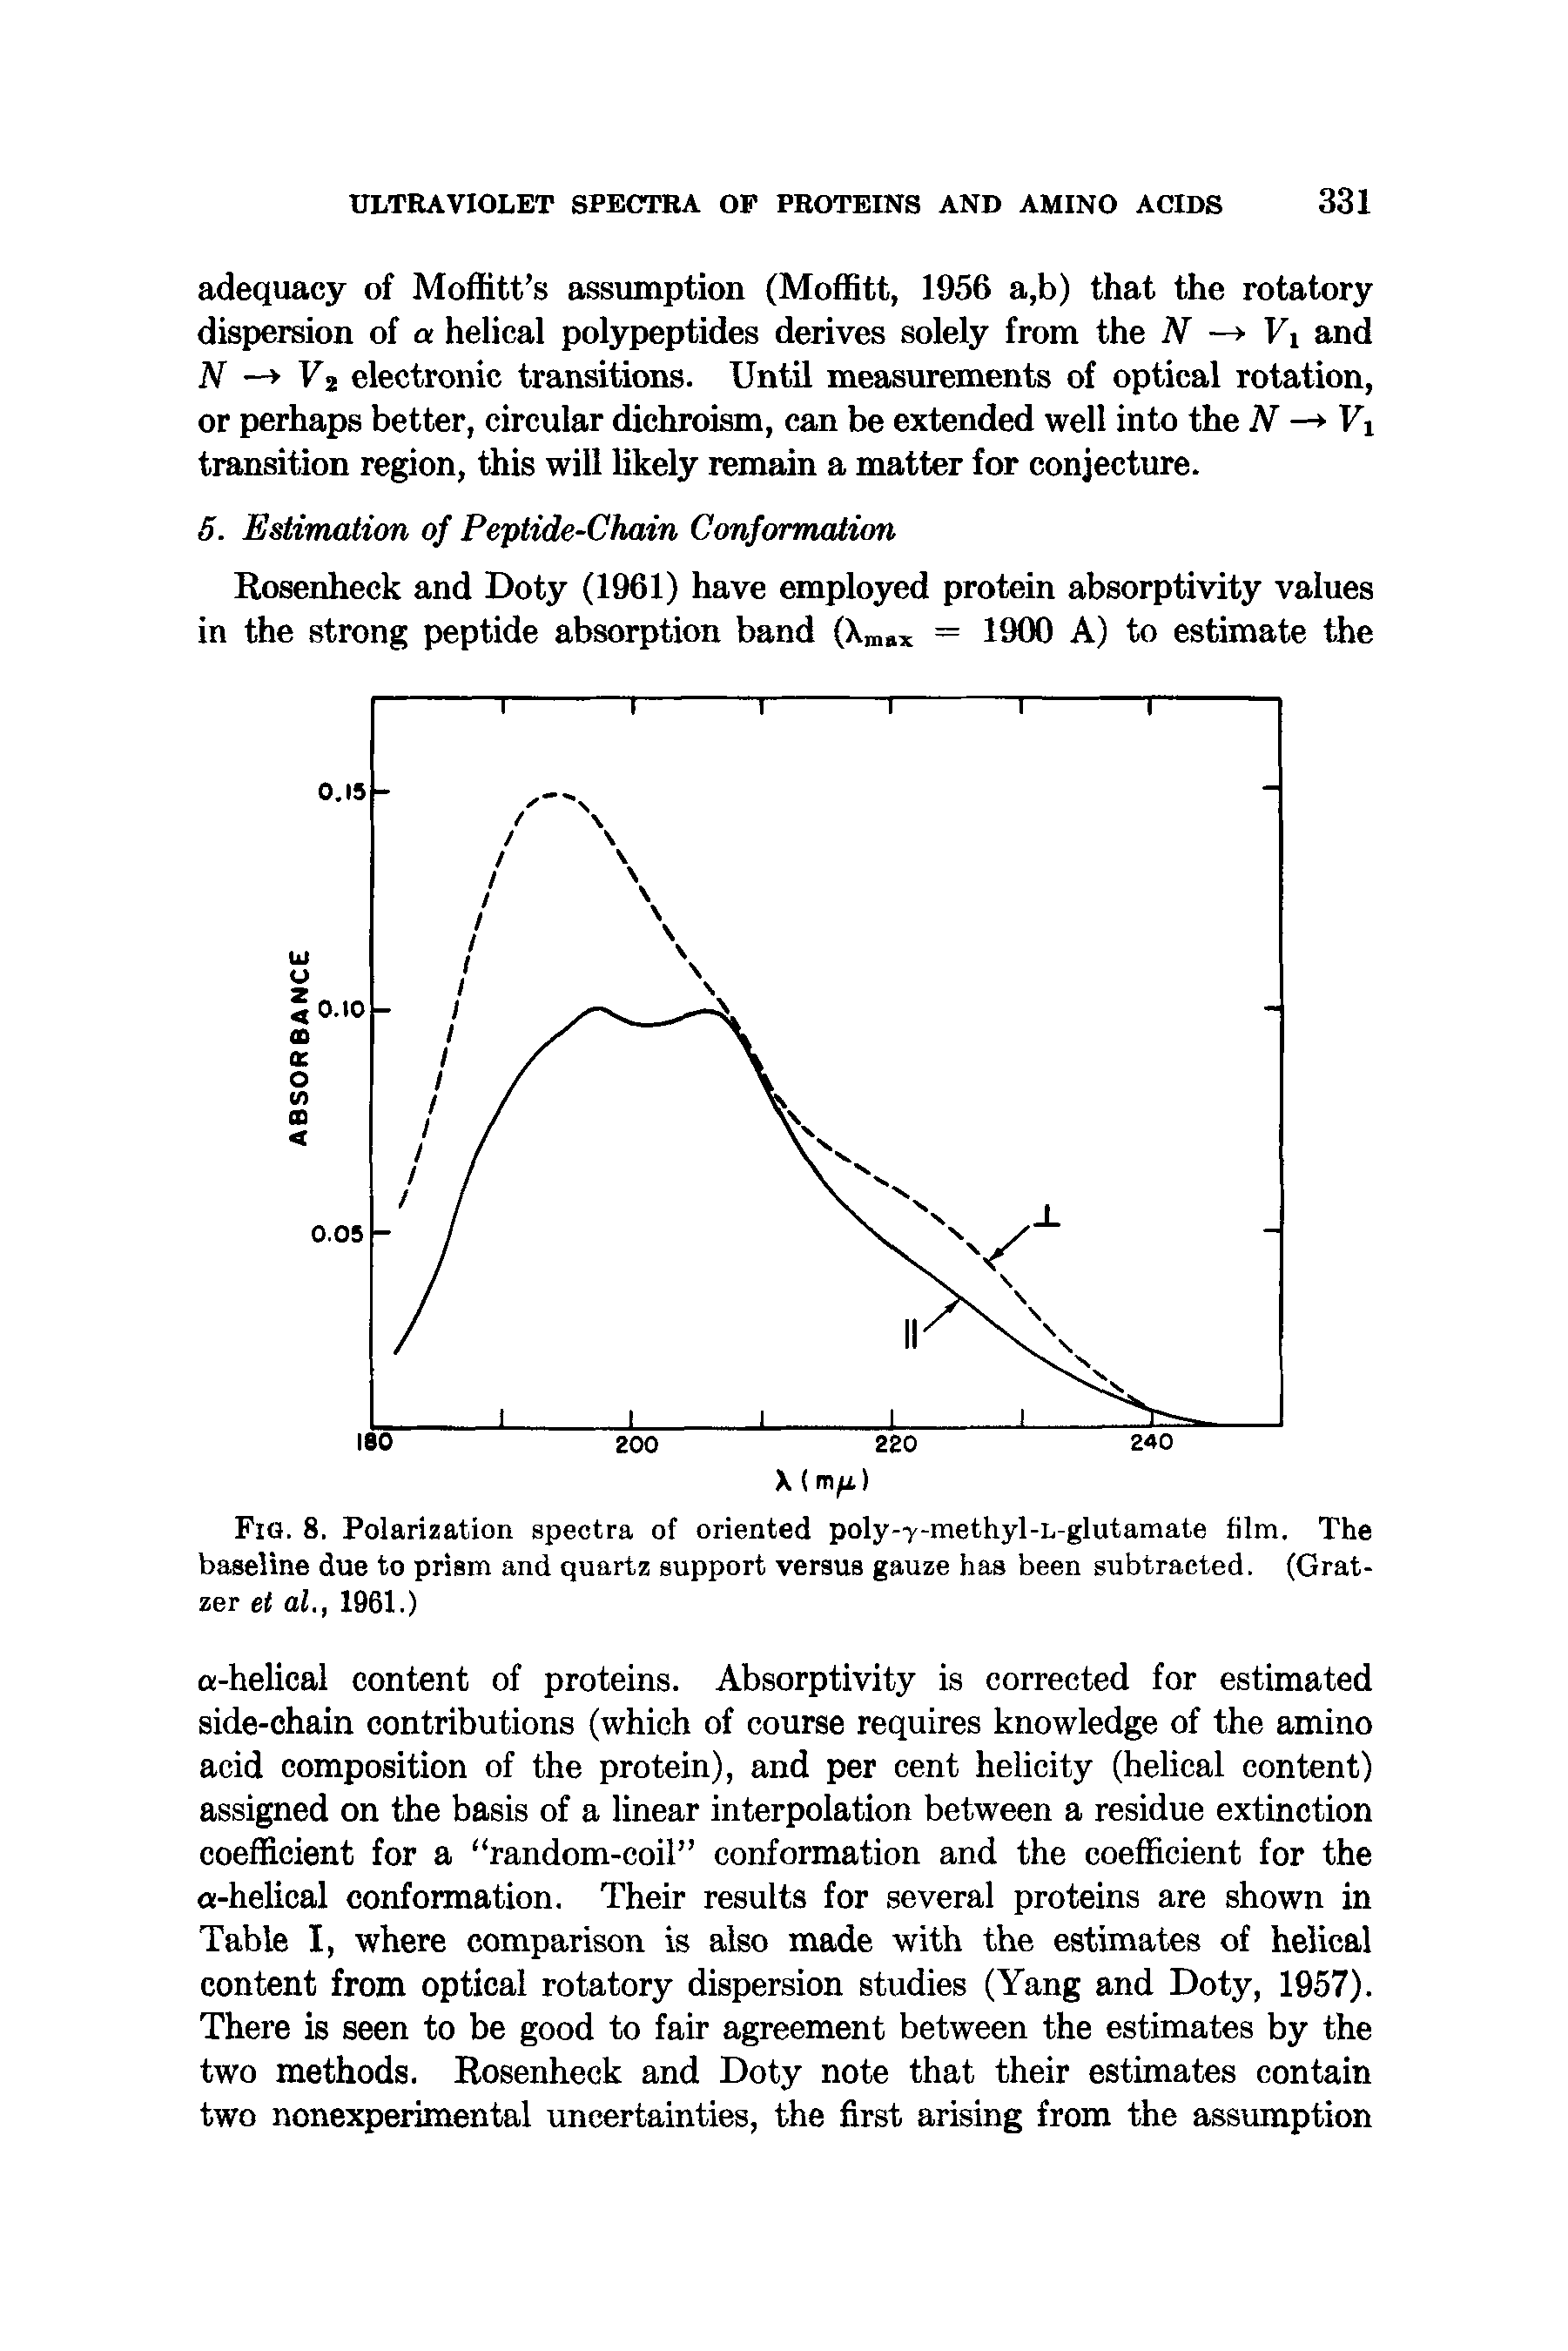 Fig. 8. Polarization spectra of oriented poly-y-methyl-L-glutamate film. The baseline due to prism and quartz support versus gauze has been subtracted. (Grat-zer et al., 1961.)...